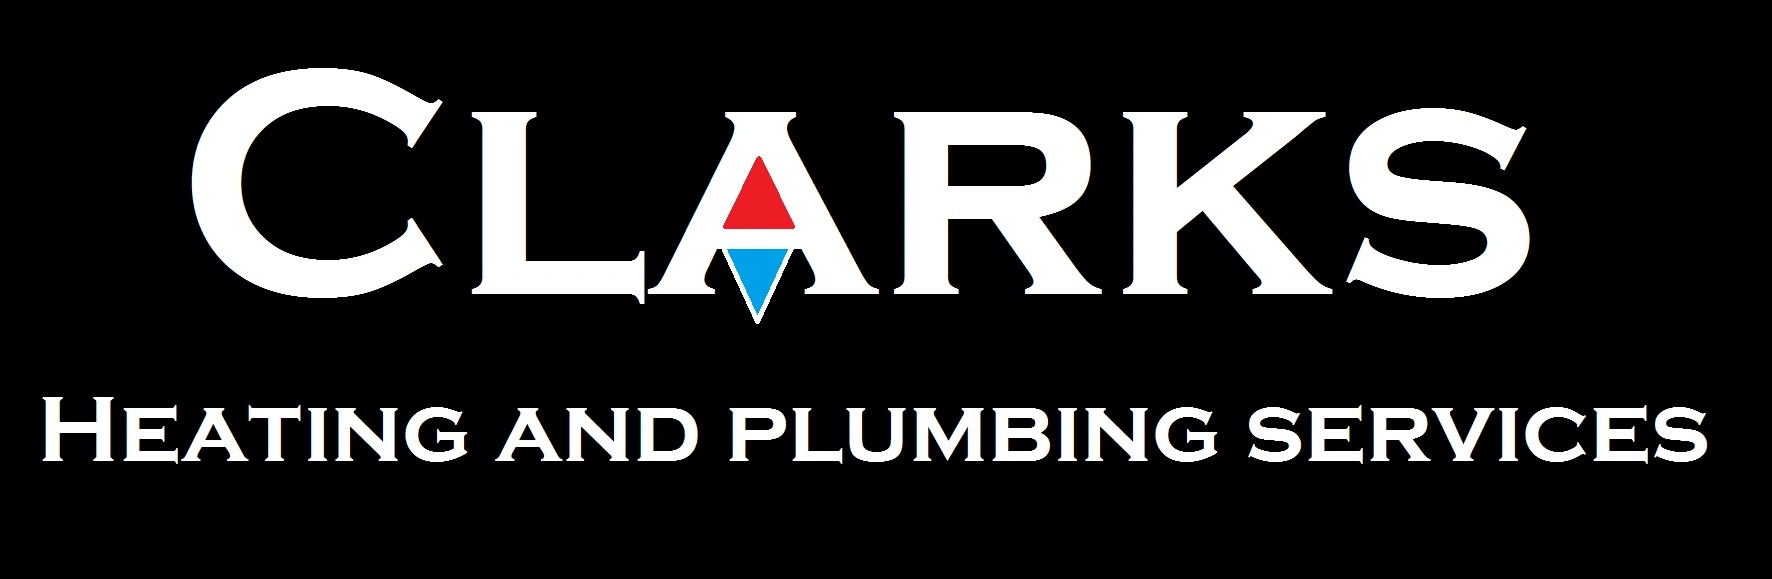 Clarks Heating and Plumbing Services LTD